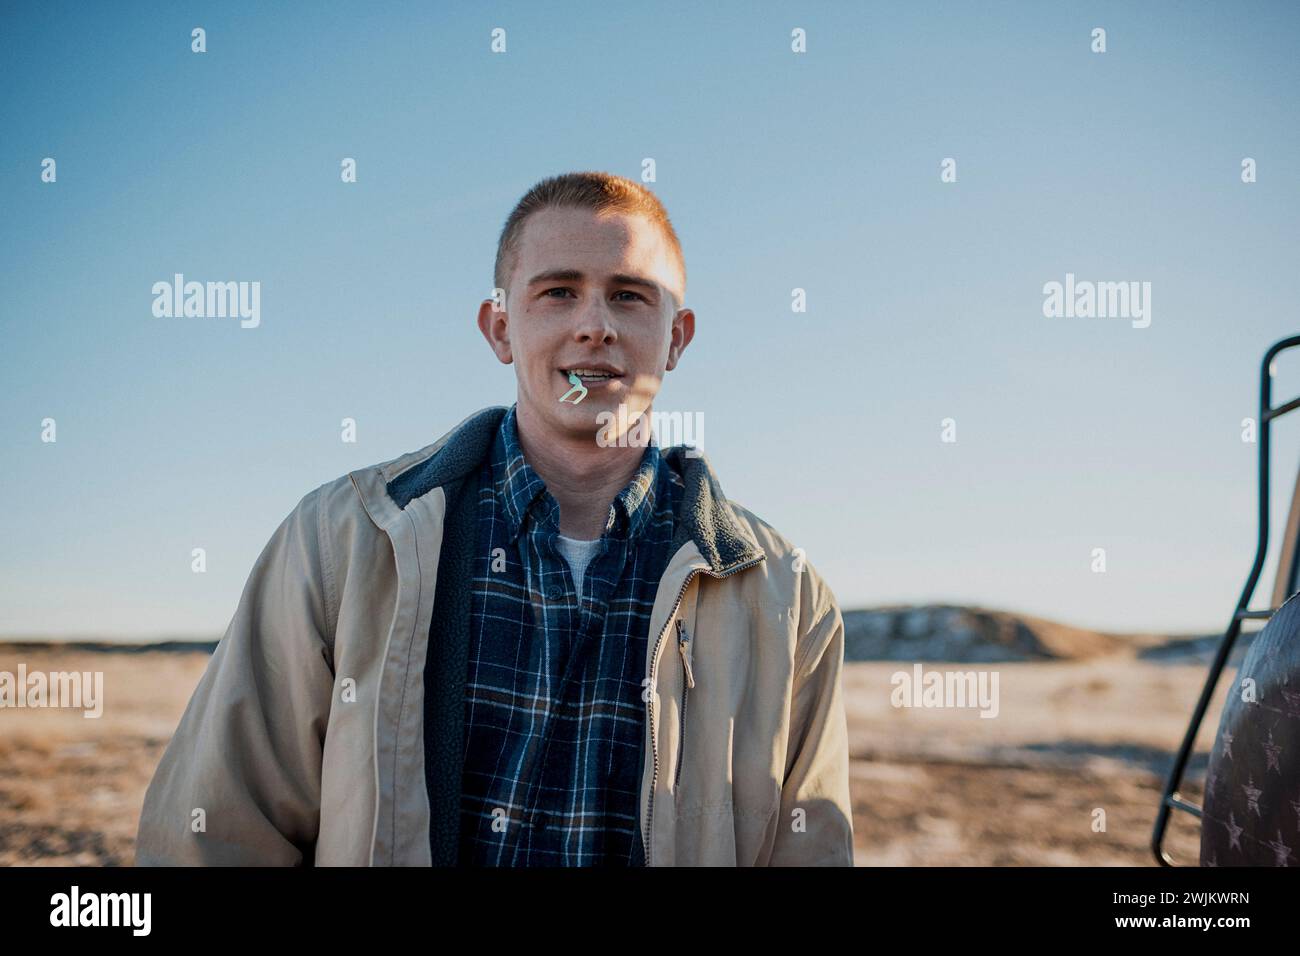 A candid portrait of a young man looking at the camera outdoors. Stock Photo